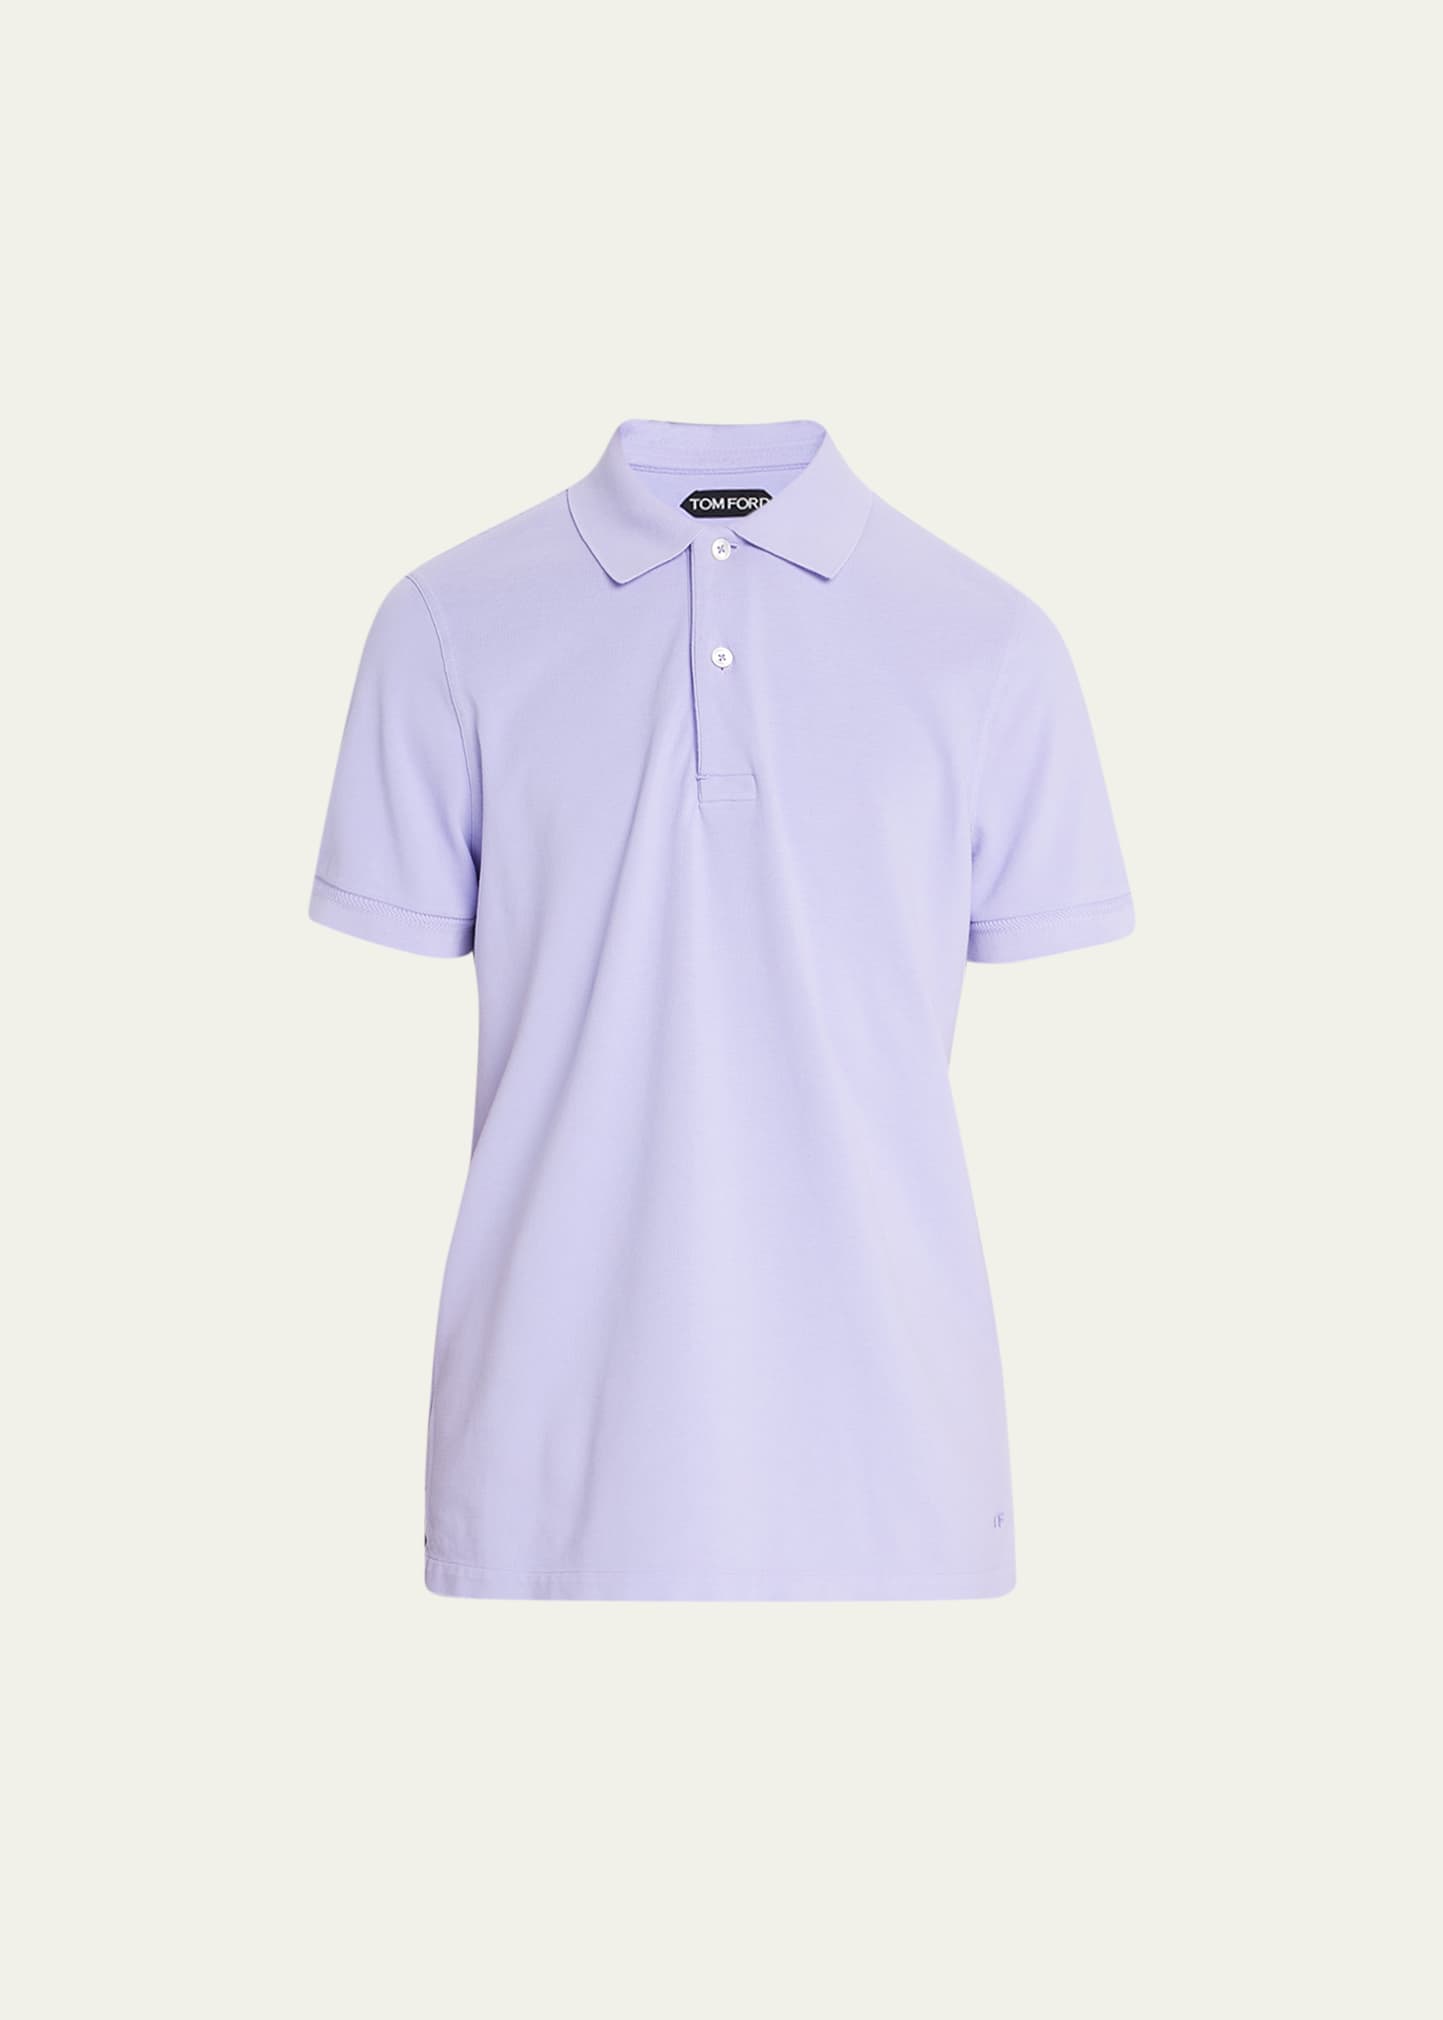 Tom Ford Men's Cotton Pique Polo Shirt In Violet